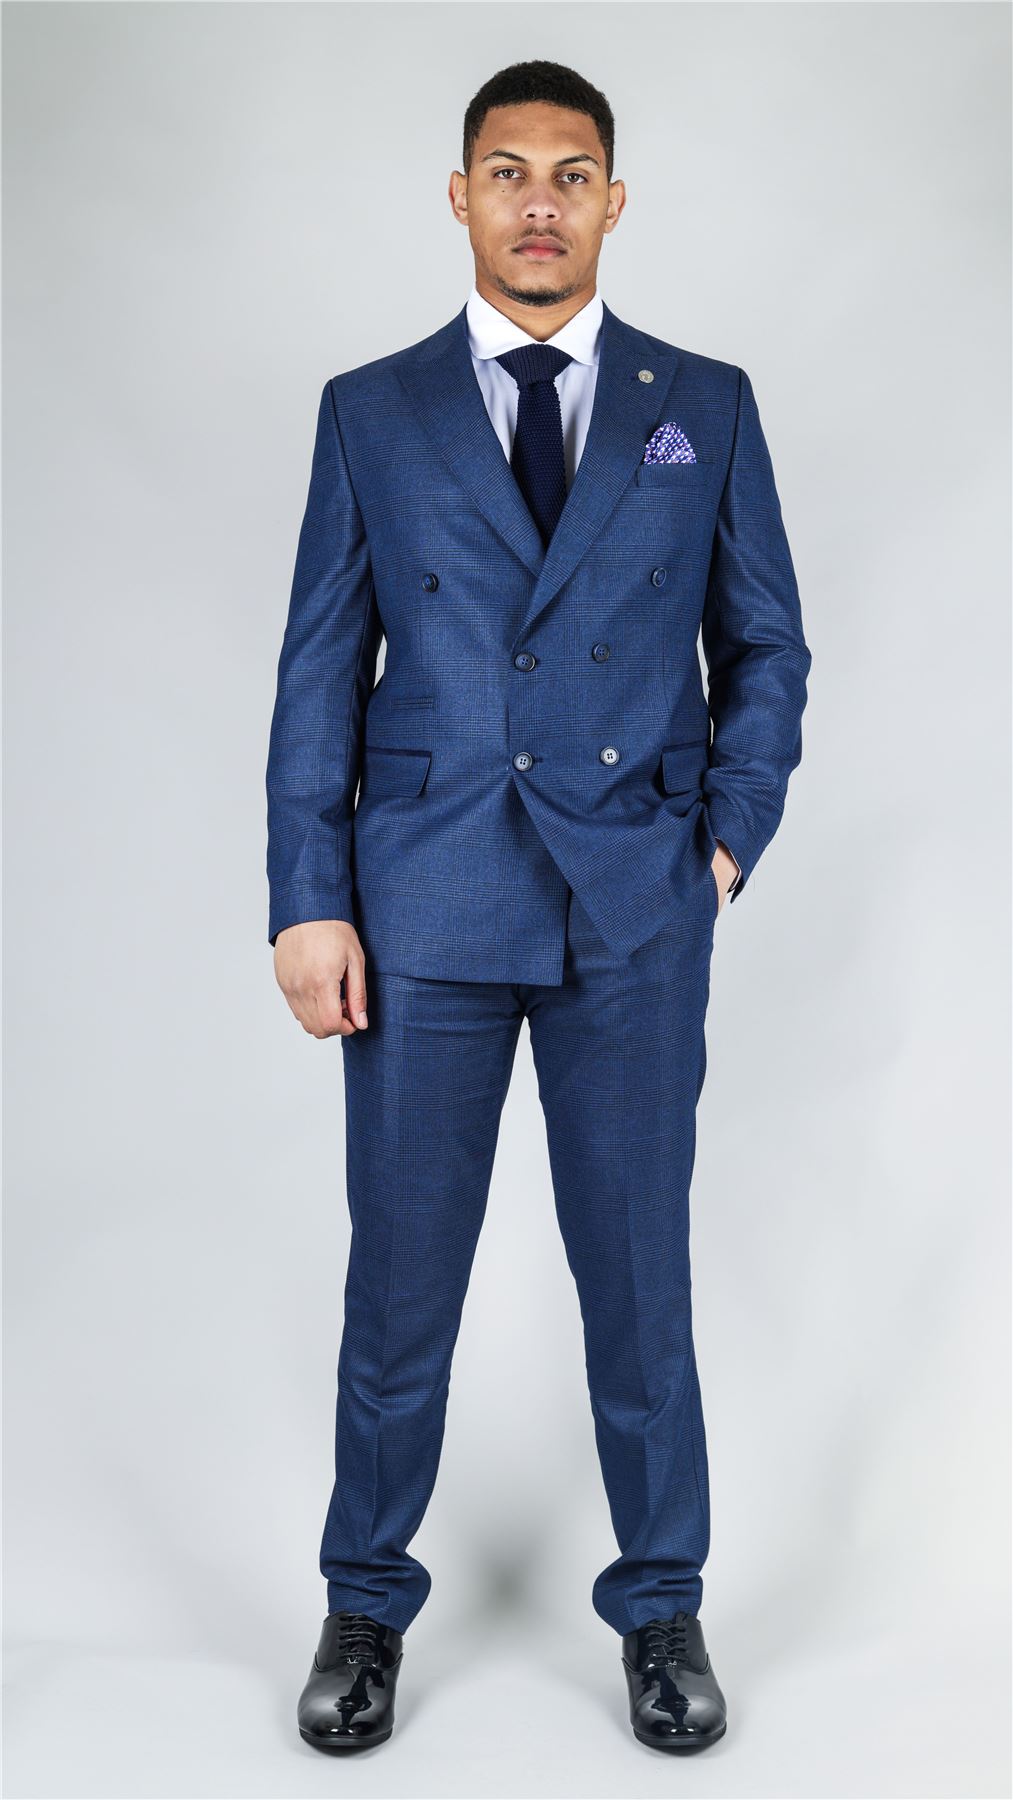 Men's Blue Suit 2 Piece Double Breasted Check Formal Dress